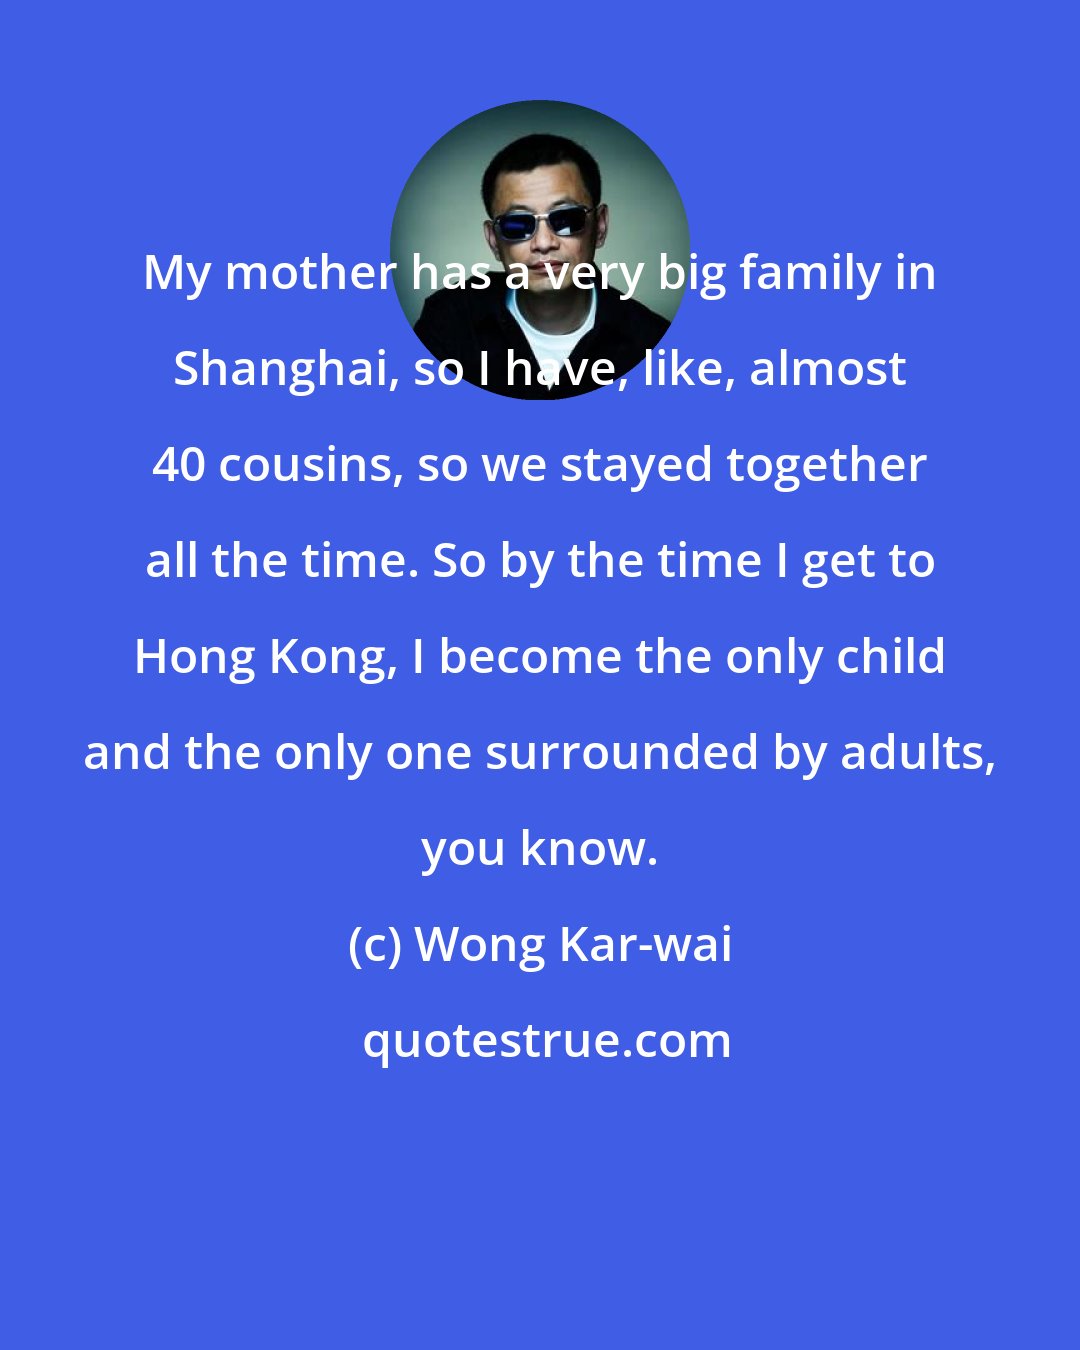 Wong Kar-wai: My mother has a very big family in Shanghai, so I have, like, almost 40 cousins, so we stayed together all the time. So by the time I get to Hong Kong, I become the only child and the only one surrounded by adults, you know.